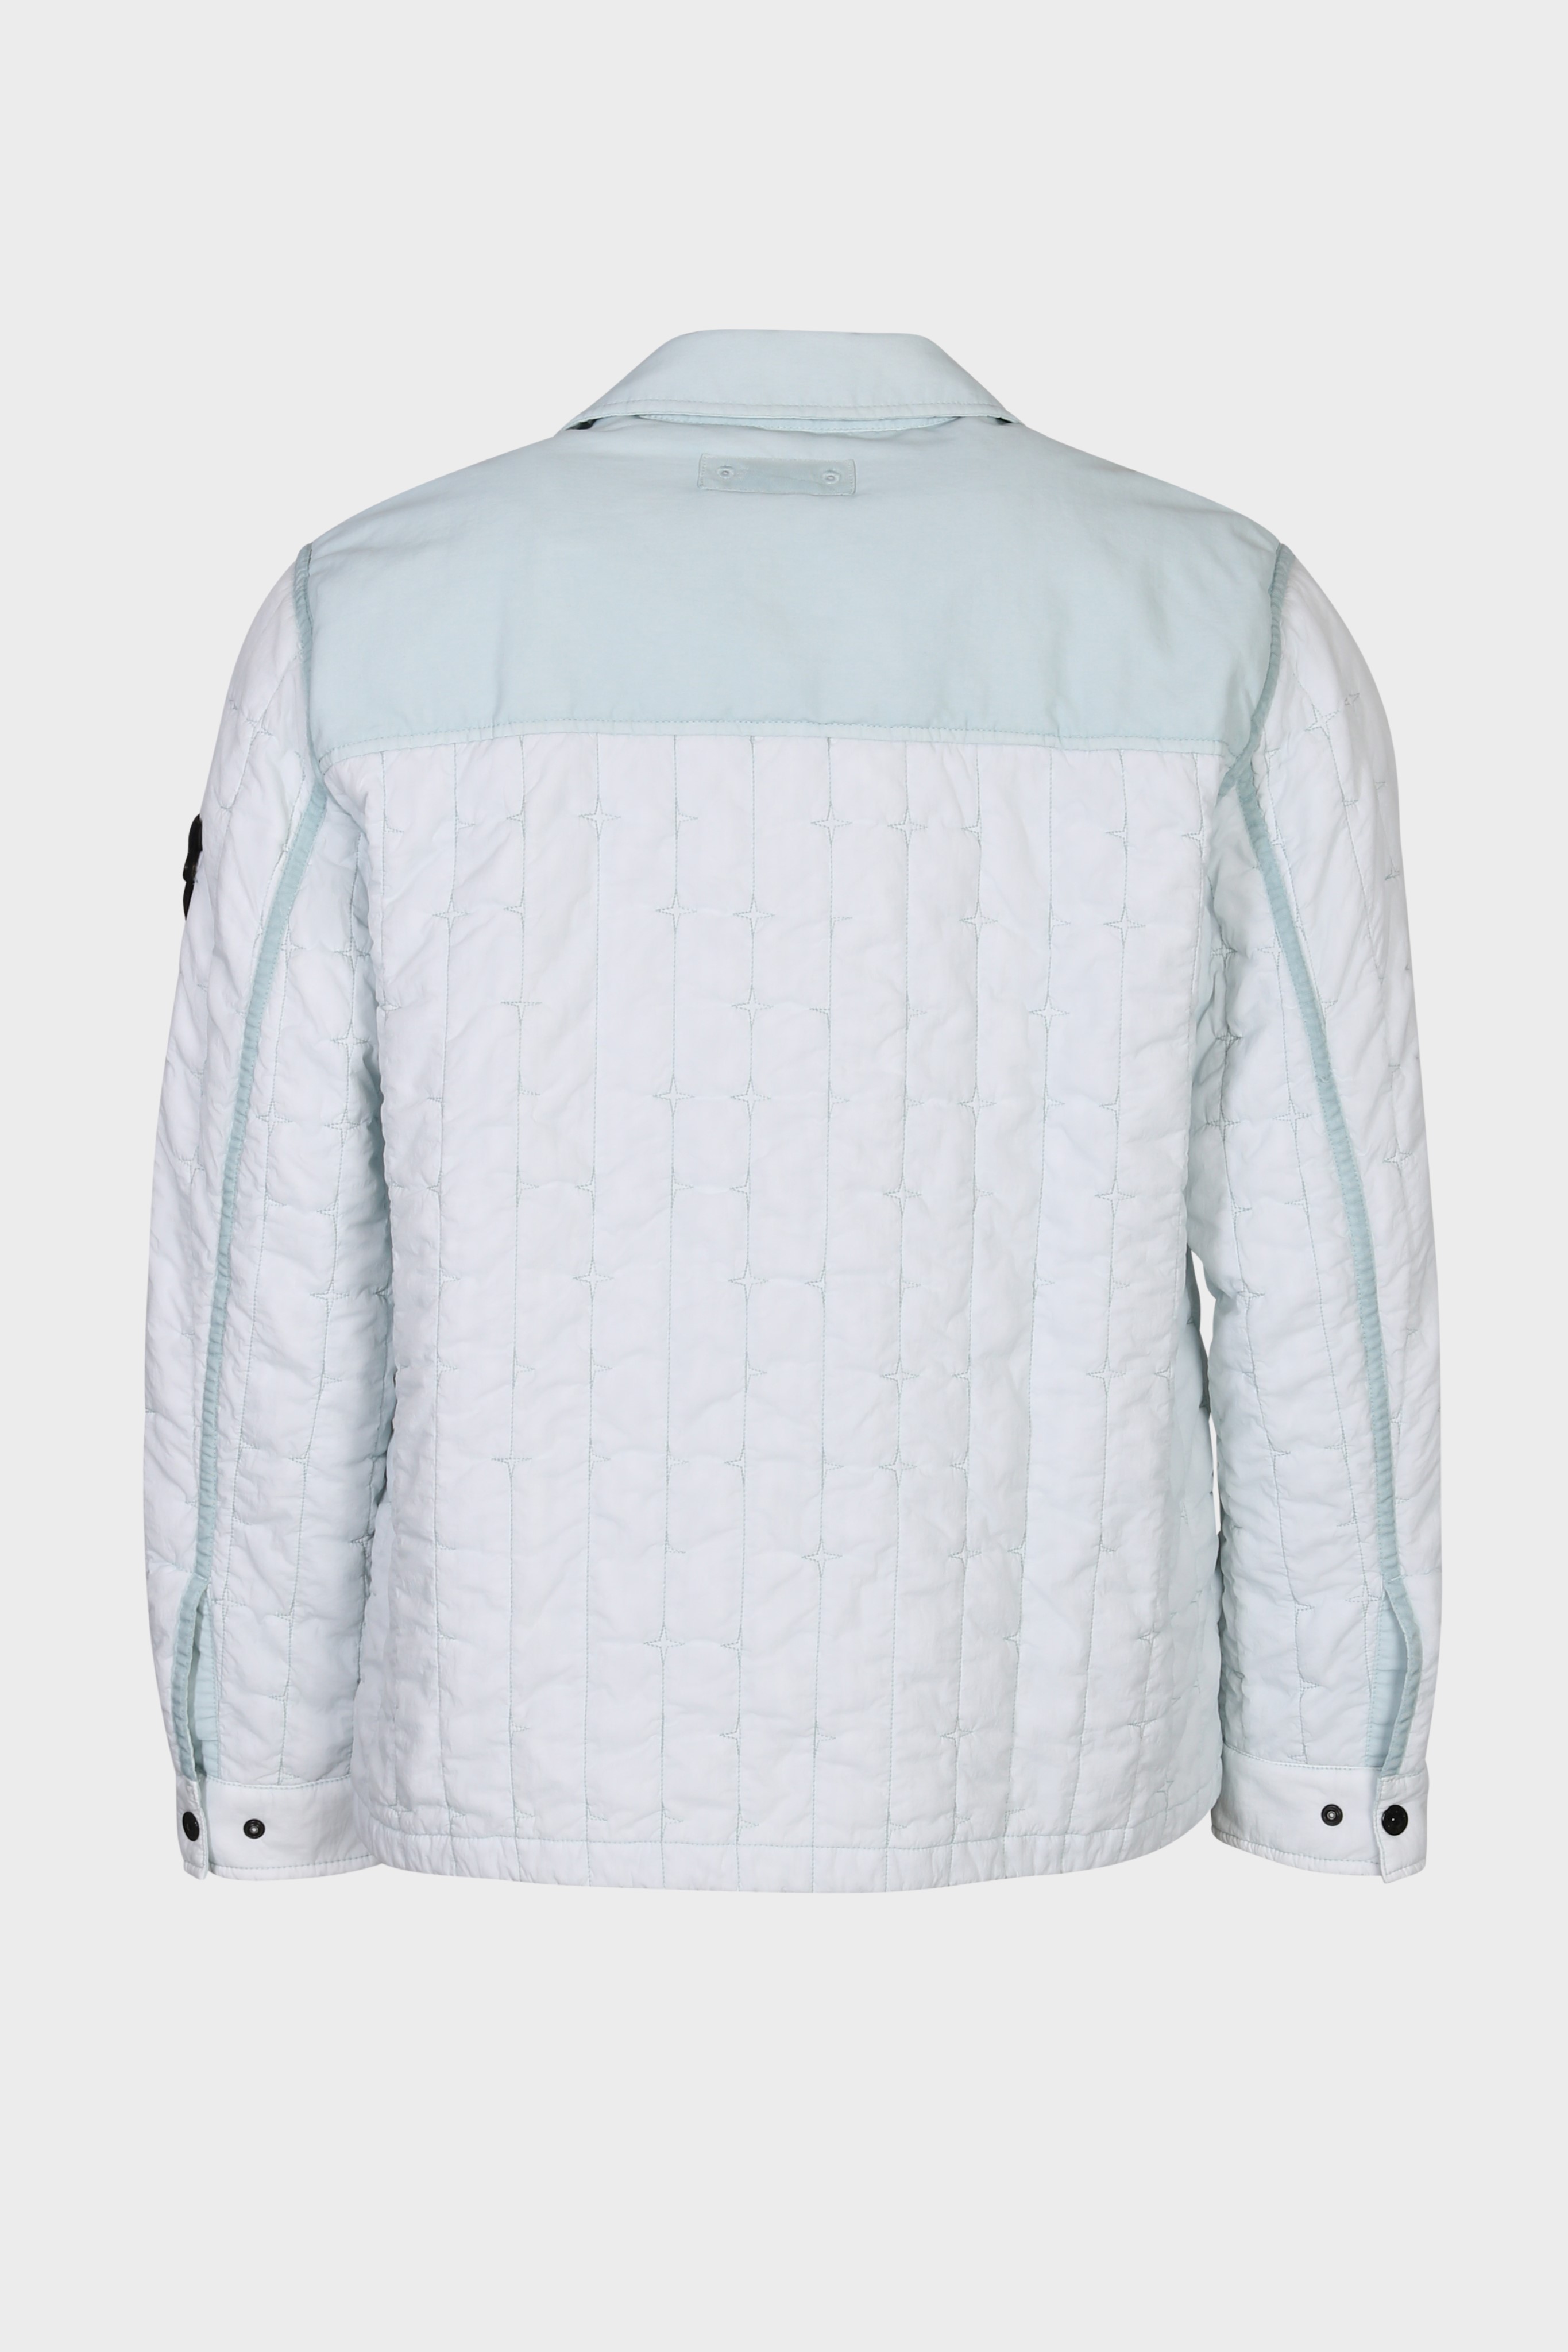 STONE ISLAND Quilted Nylon Stella Jacket in Sky Blue XL